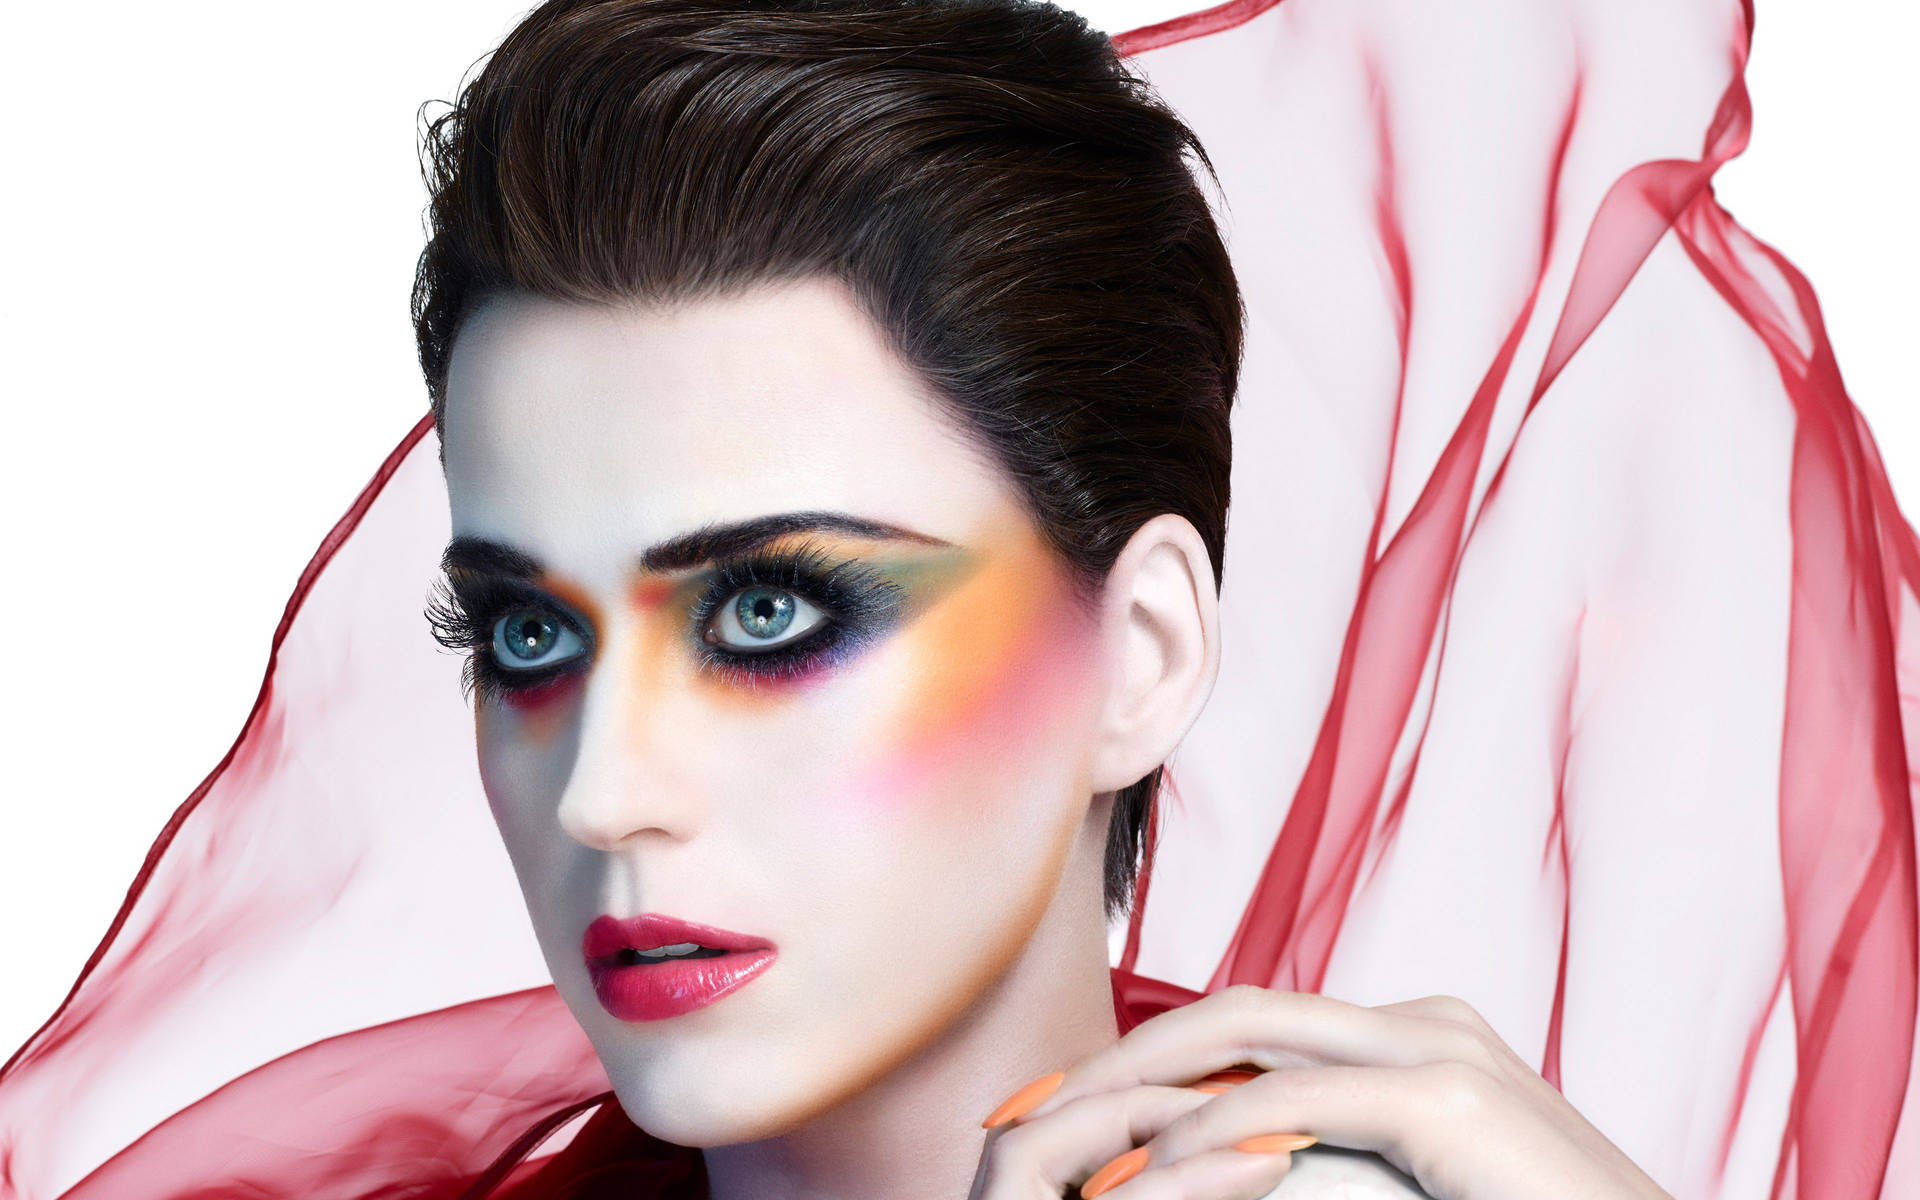 Katy Perry Radiates With Beauty In Couture Makeup. Background